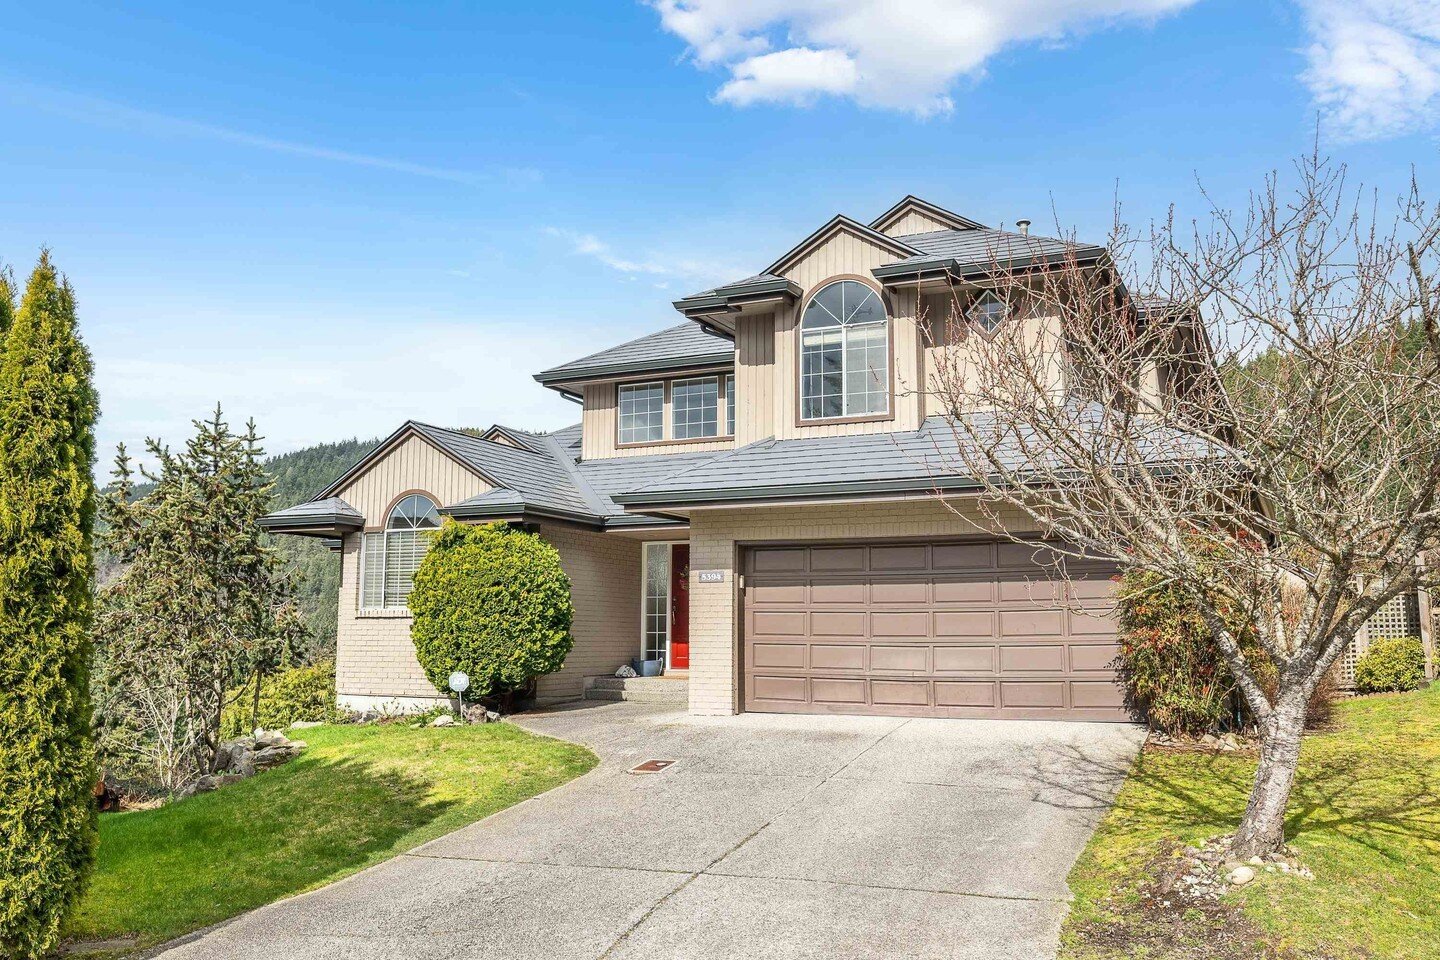 5394 WESTHAVEN Wynd, West Vancouver: $2,798,000 For more information on this property - click on the link in our bio and look up this address!  #Oceanview #Vancouver #westvancouver #whiterock #luxuryhomesvancouver #oceanviewhomes #VancouverRealEstate